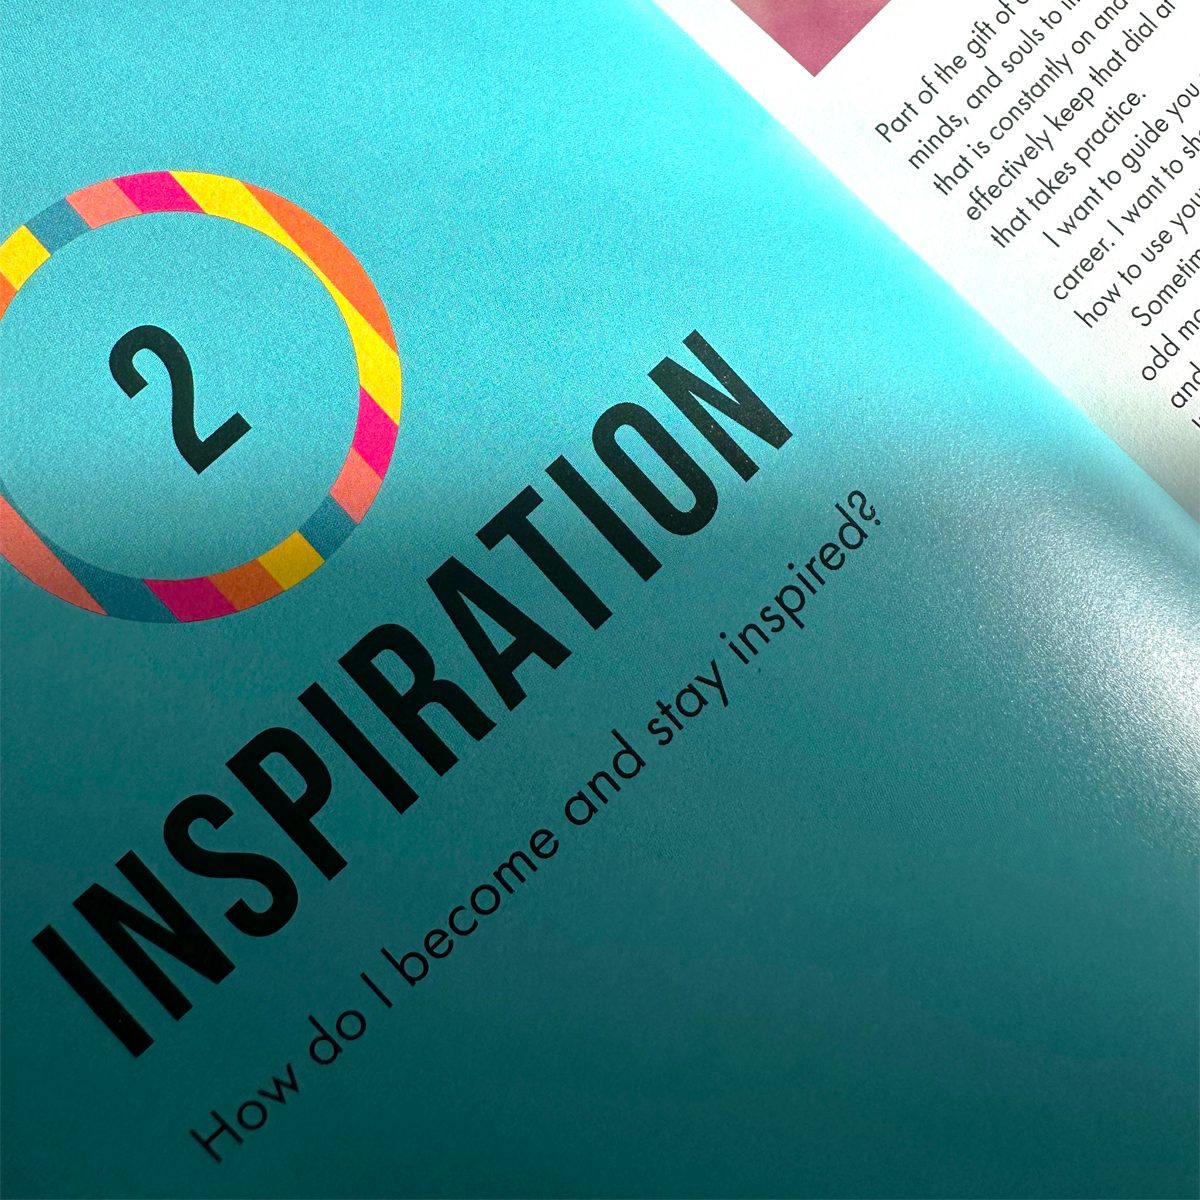 How to find inspiration during stressful times